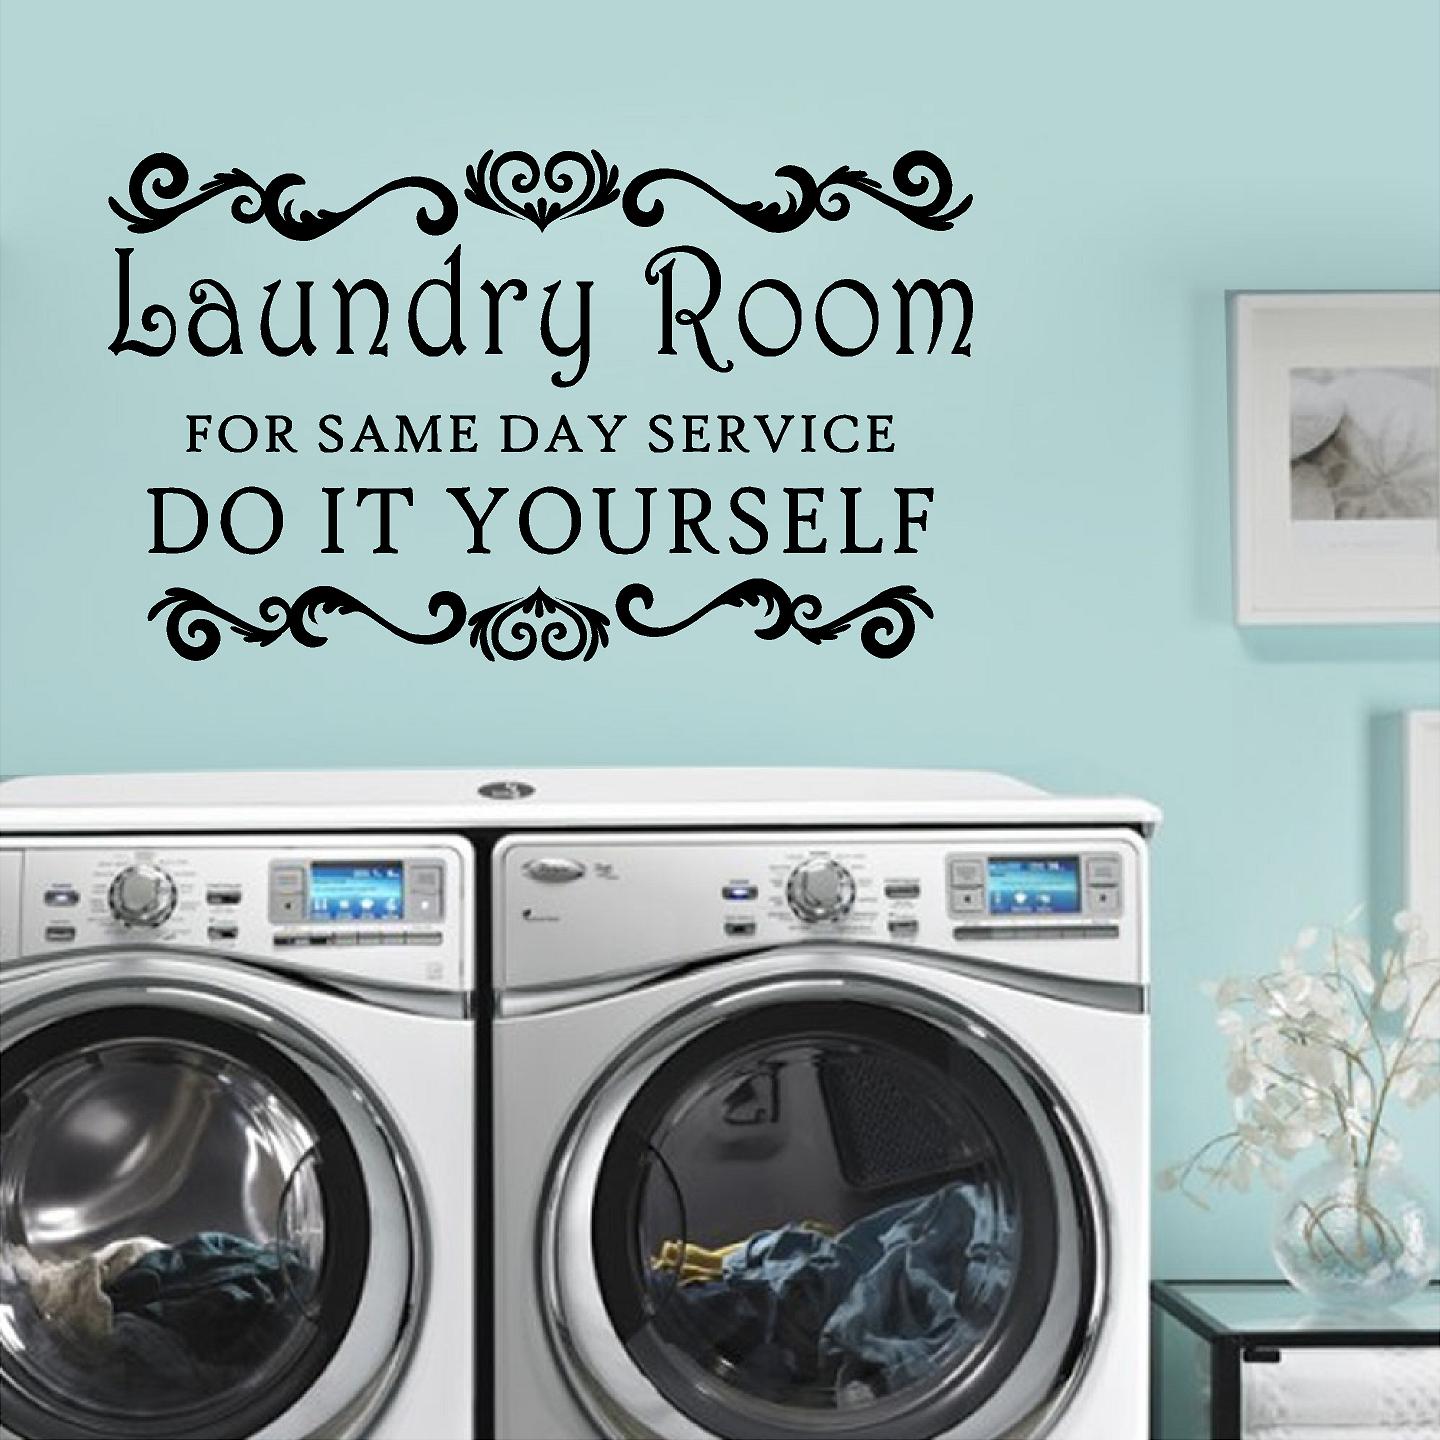 Stickers. Vinyl Wall Decal. Laundry Room Decor. For Same Day Service. Do it Yourself.